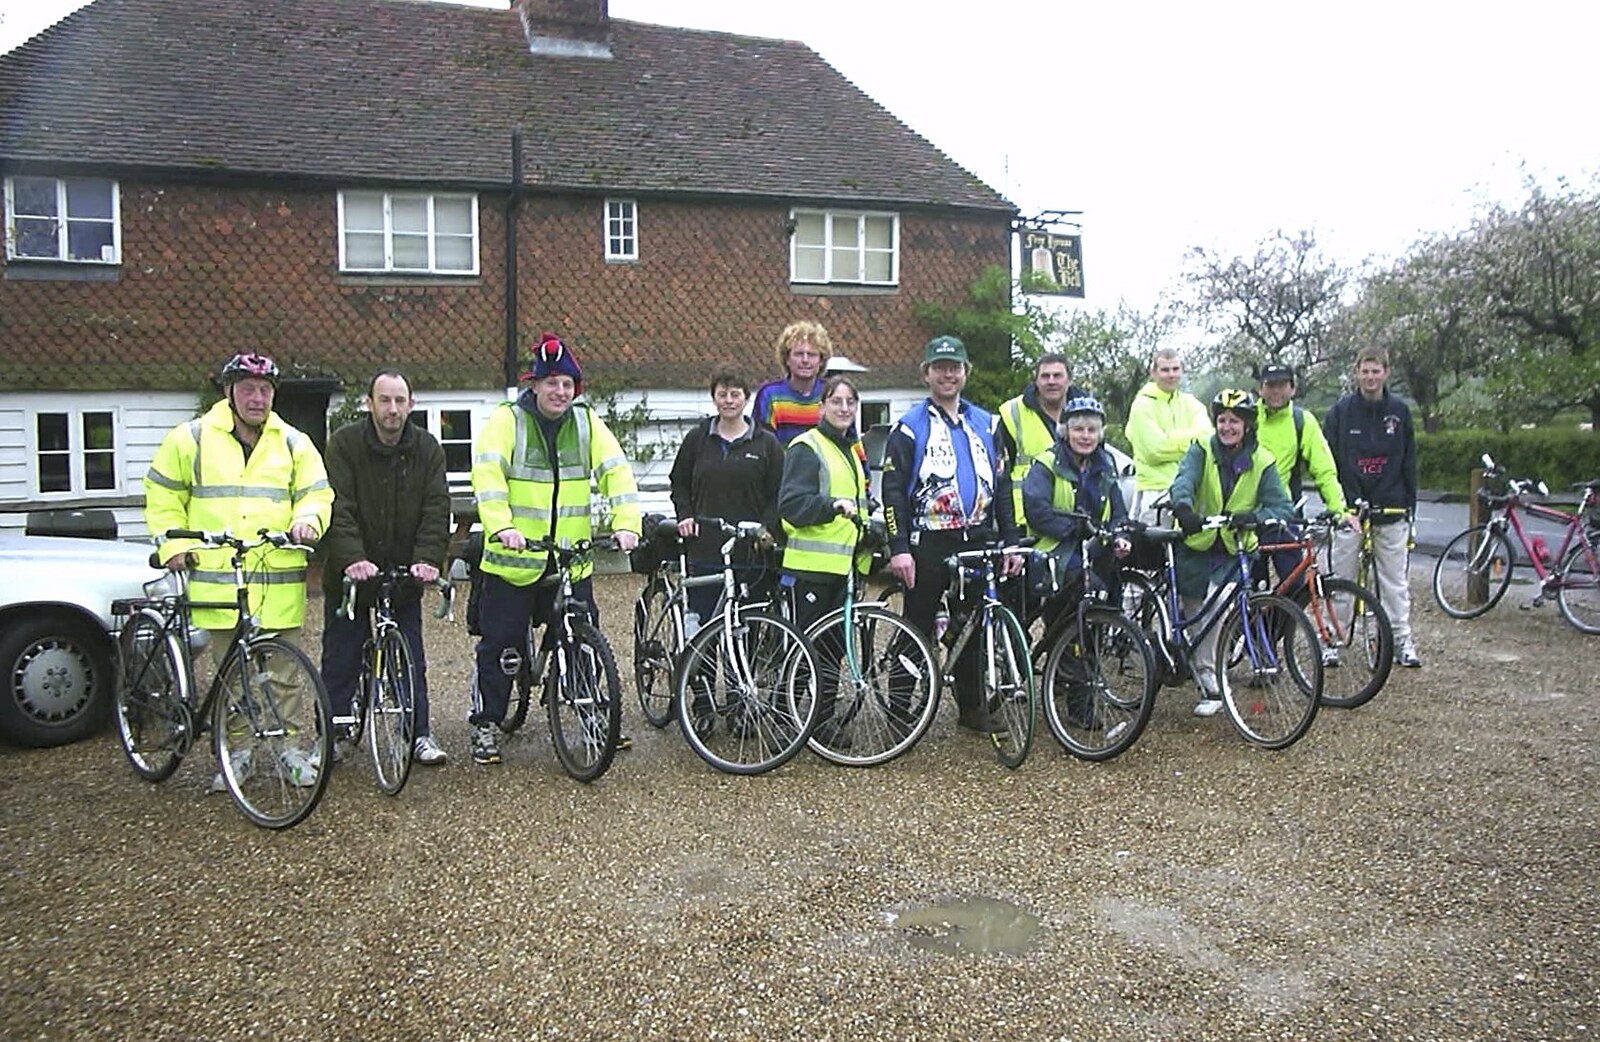 The BSCC Annual Bike Ride, Lenham, Kent - 8th May 2004: A group photo outside the pub, which is closed